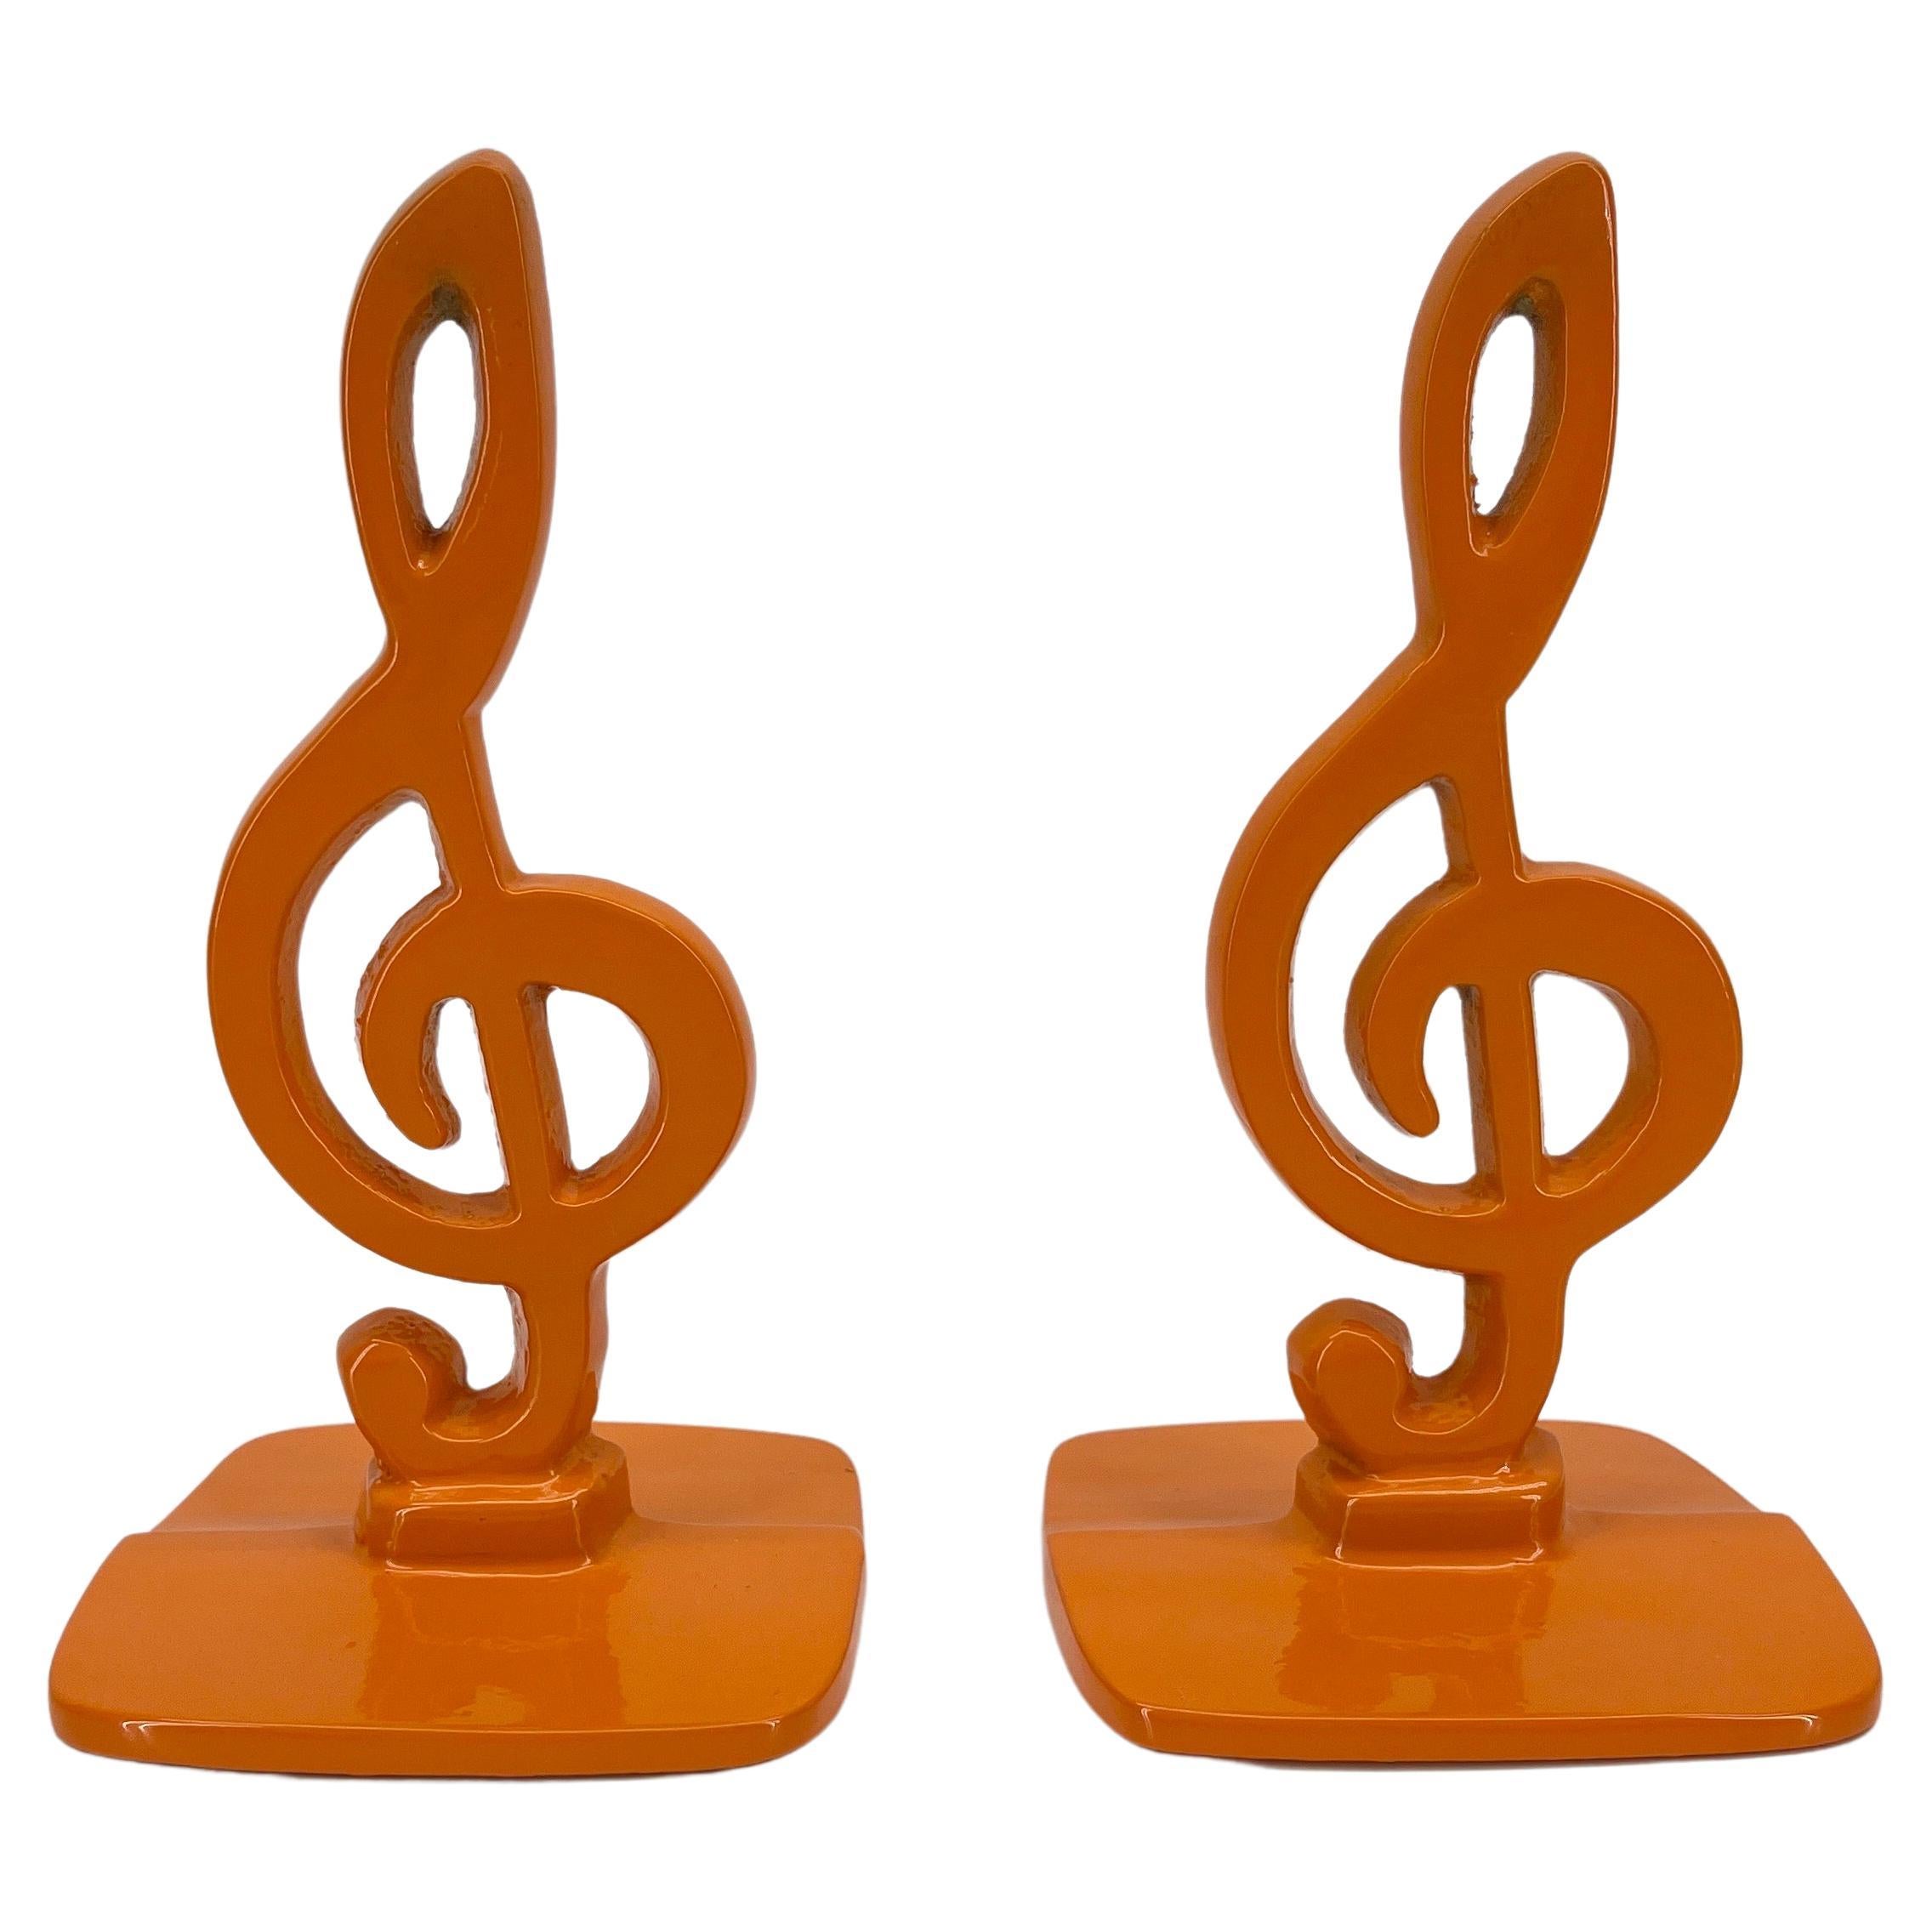 Vintage Pair of Music Note Bookends, Powder-Coated Orange 